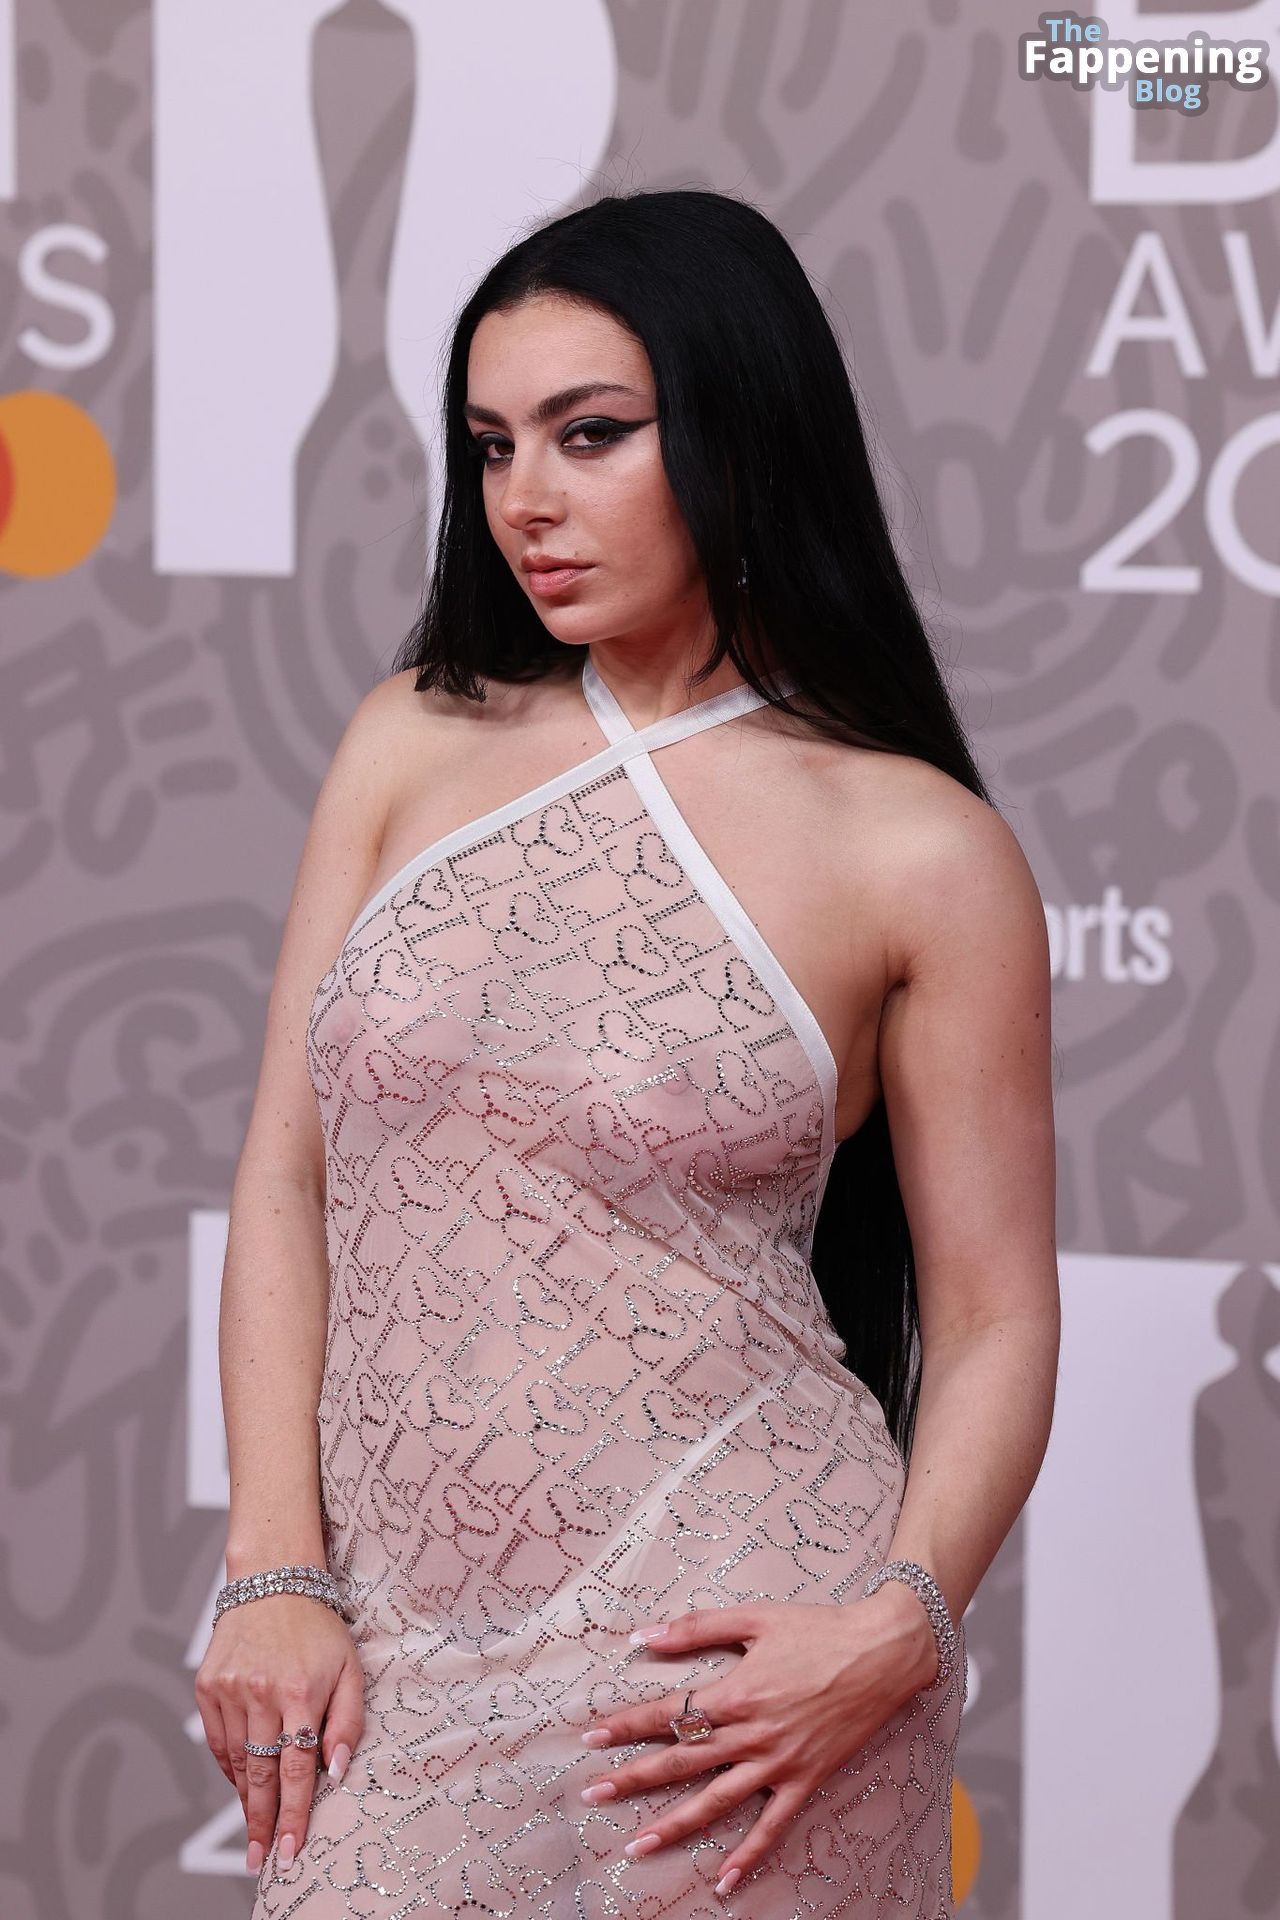 Charli-XCX-See-Through-Nudity-The-Fappening-Blog-45.jpg